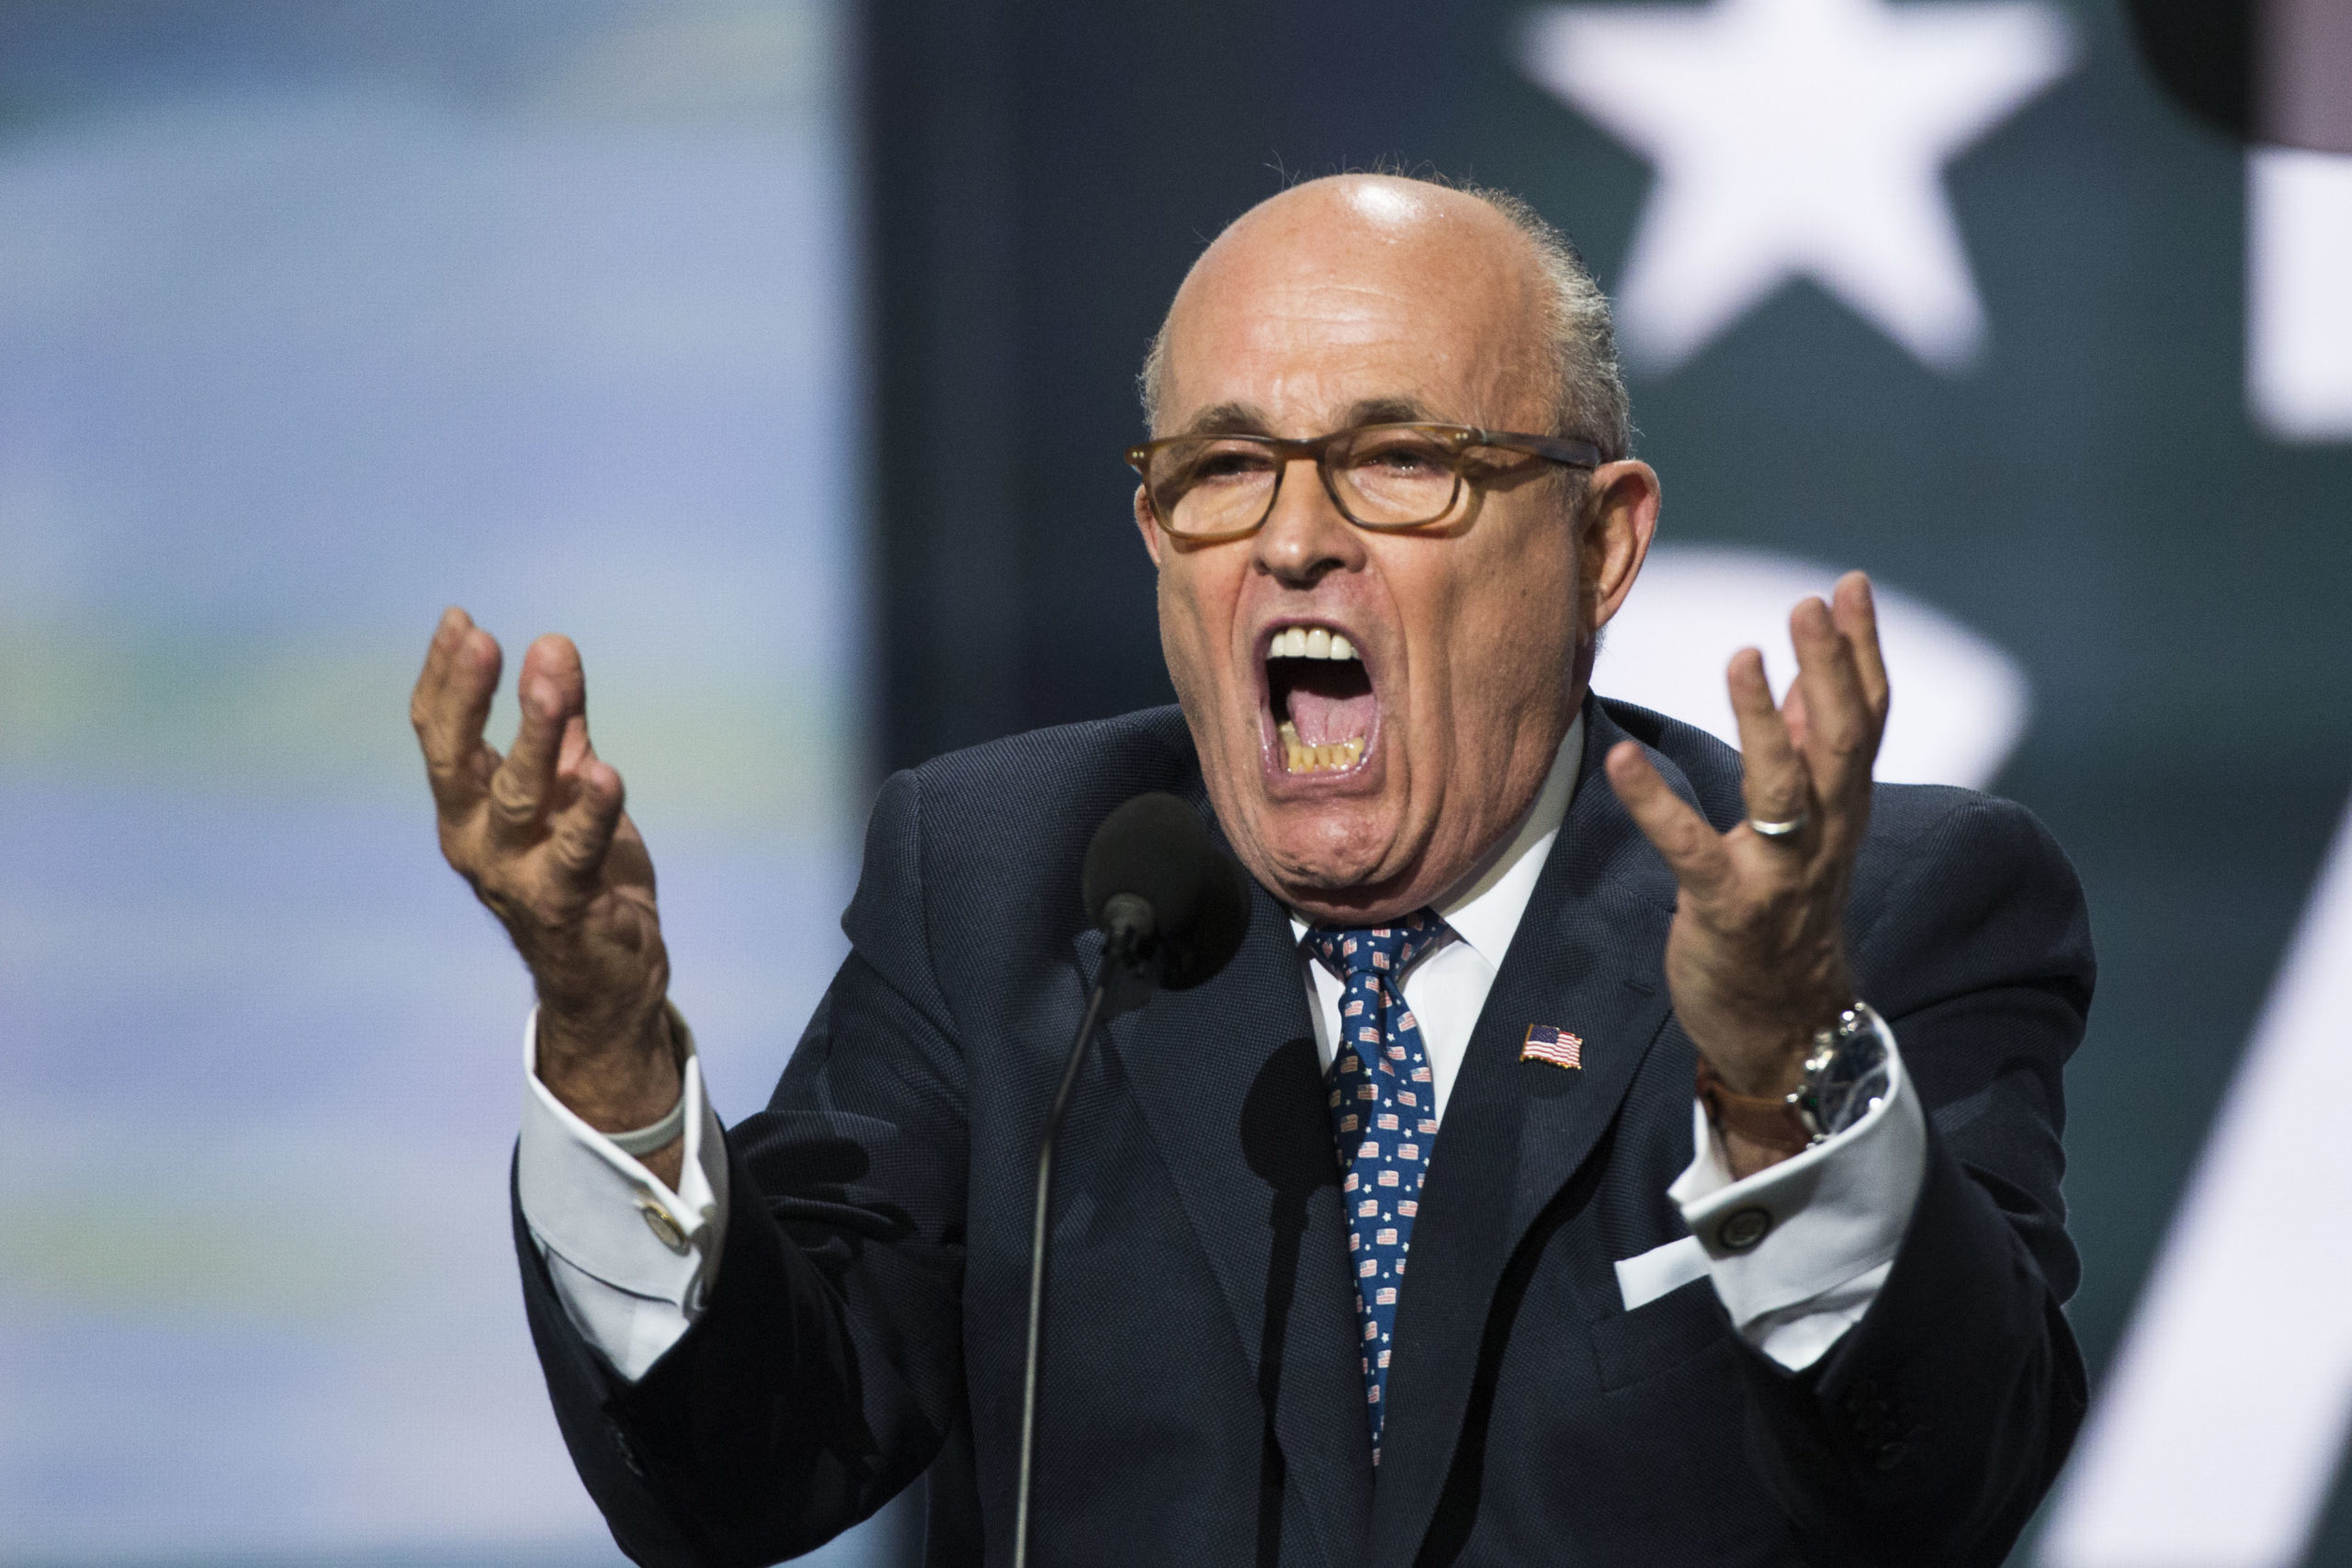 Video of Giuliani’s Shouting Match With ‘Jackass’ at Parade Tops 242K Views